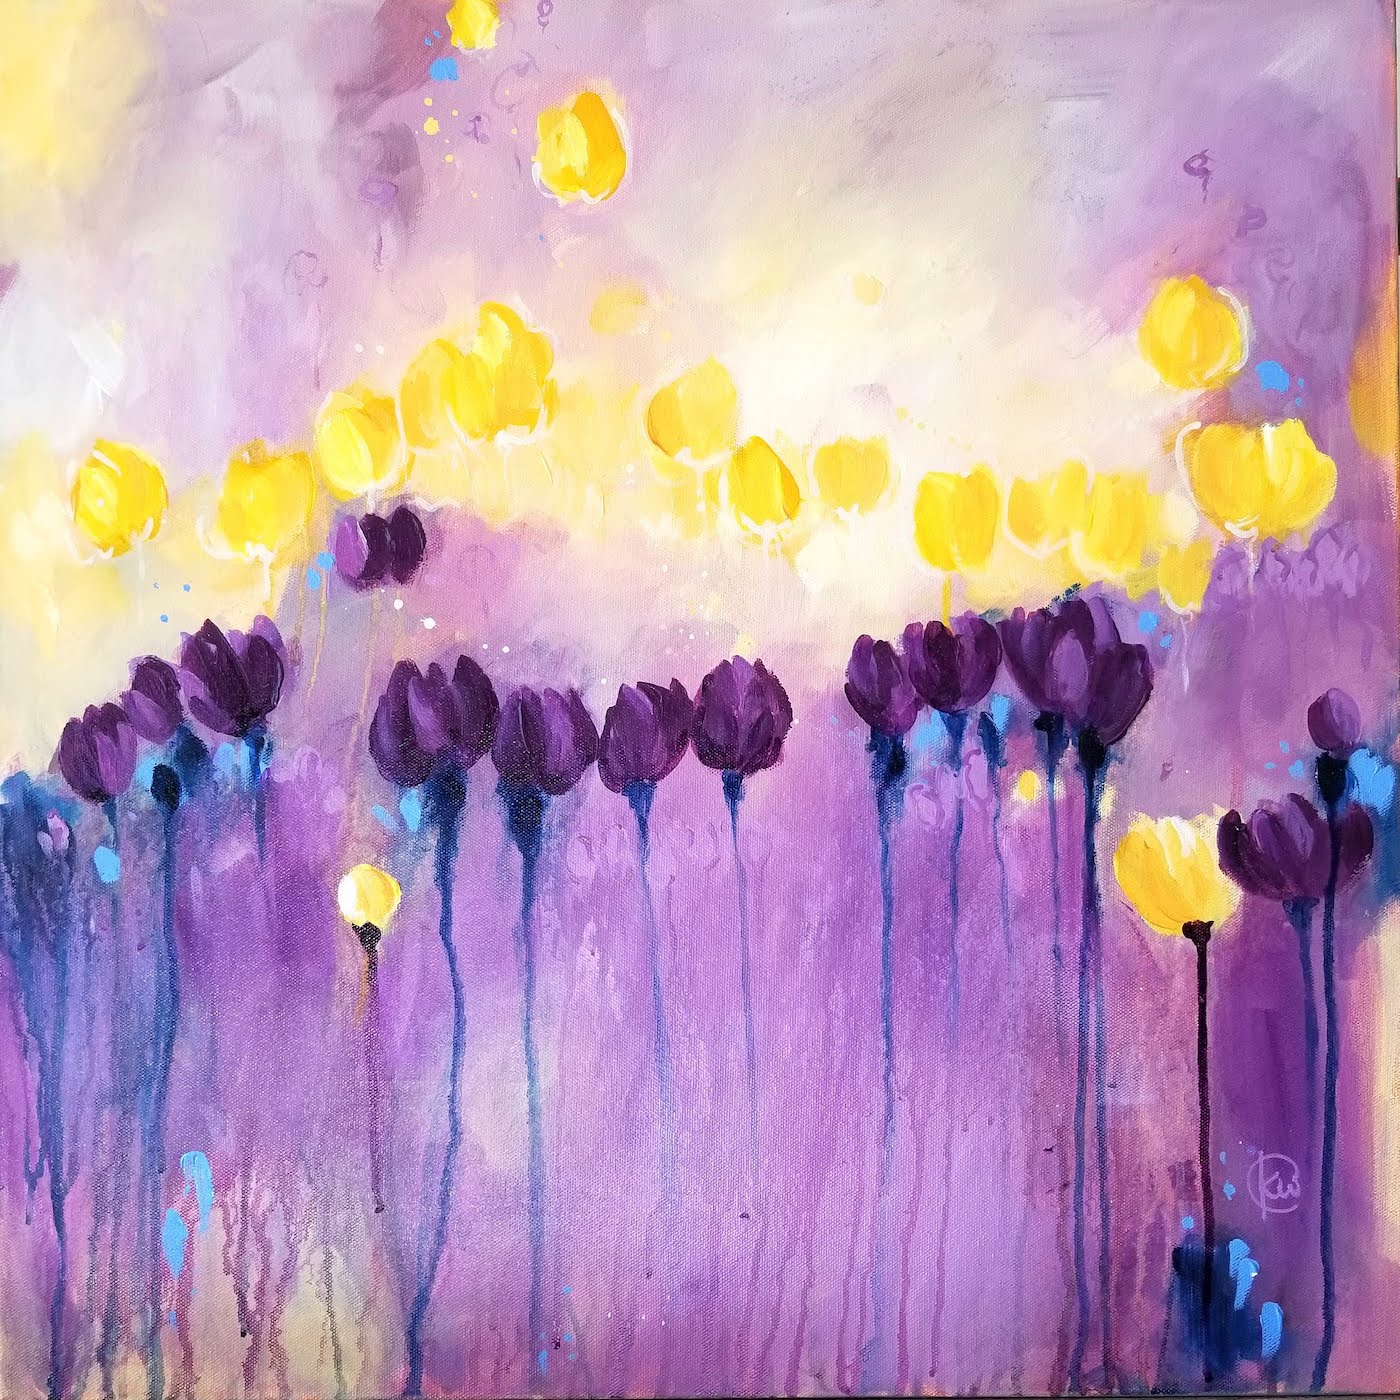 ©Kellee Wynne Conrad, The Sound of Sunshine. Acrylic on gallery wrapped canvas, 24 x 24 inches. Used with permission. 